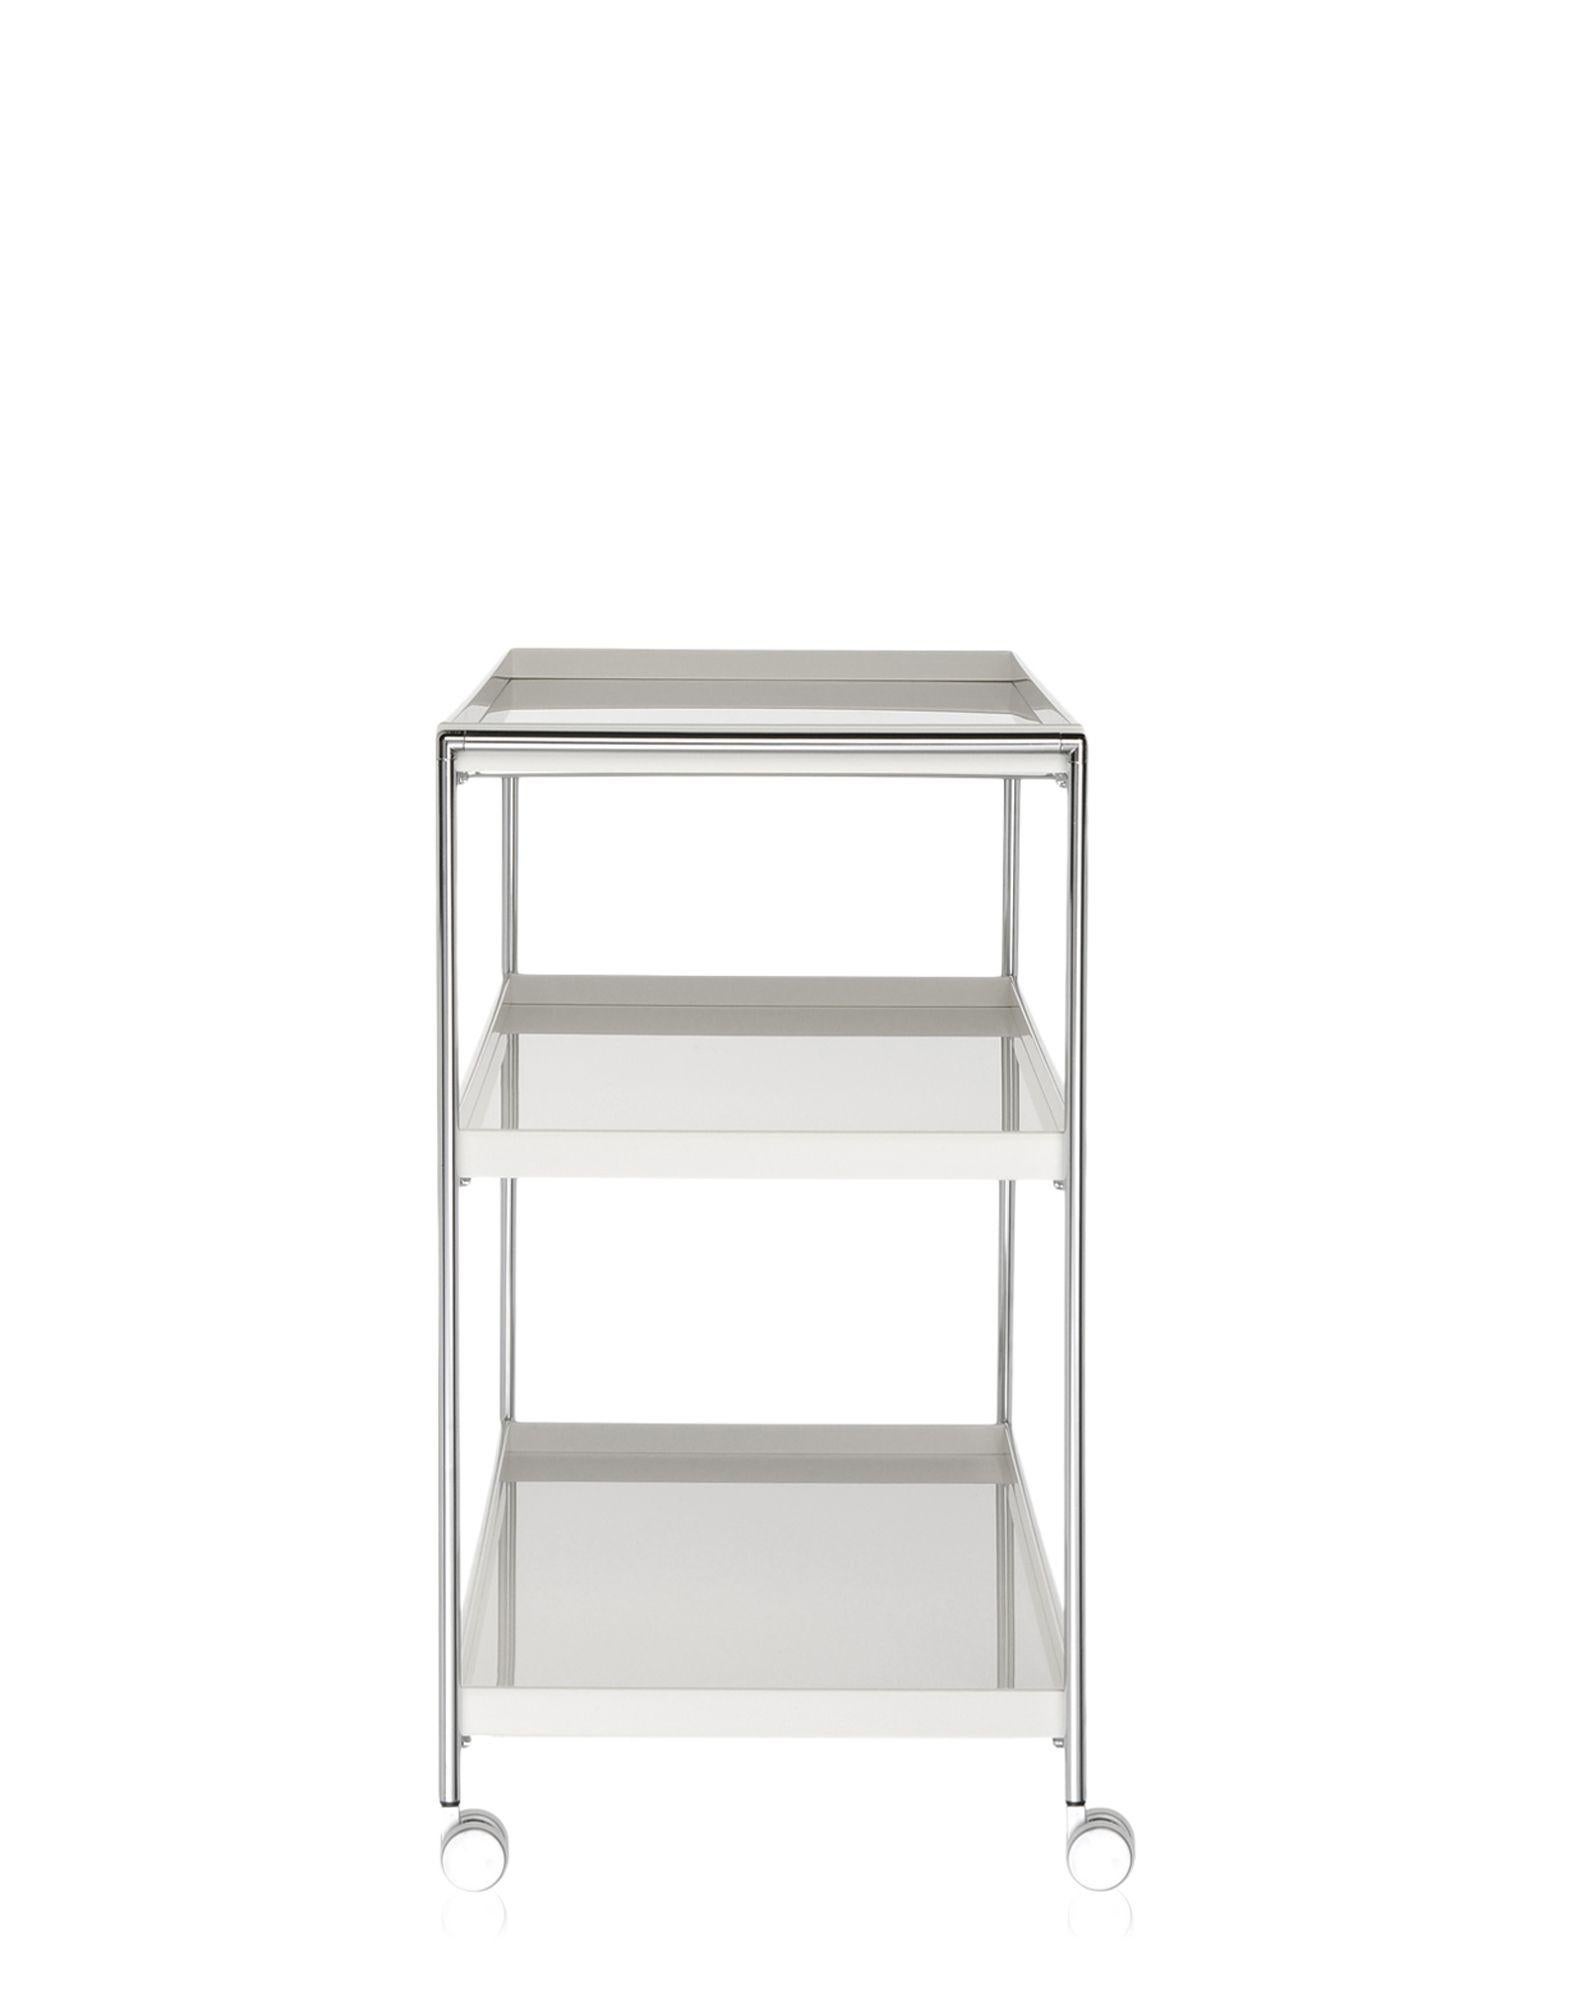 Kartell Multi Rectangular Tray Table by Piero Lissoni In New Condition For Sale In Brooklyn, NY